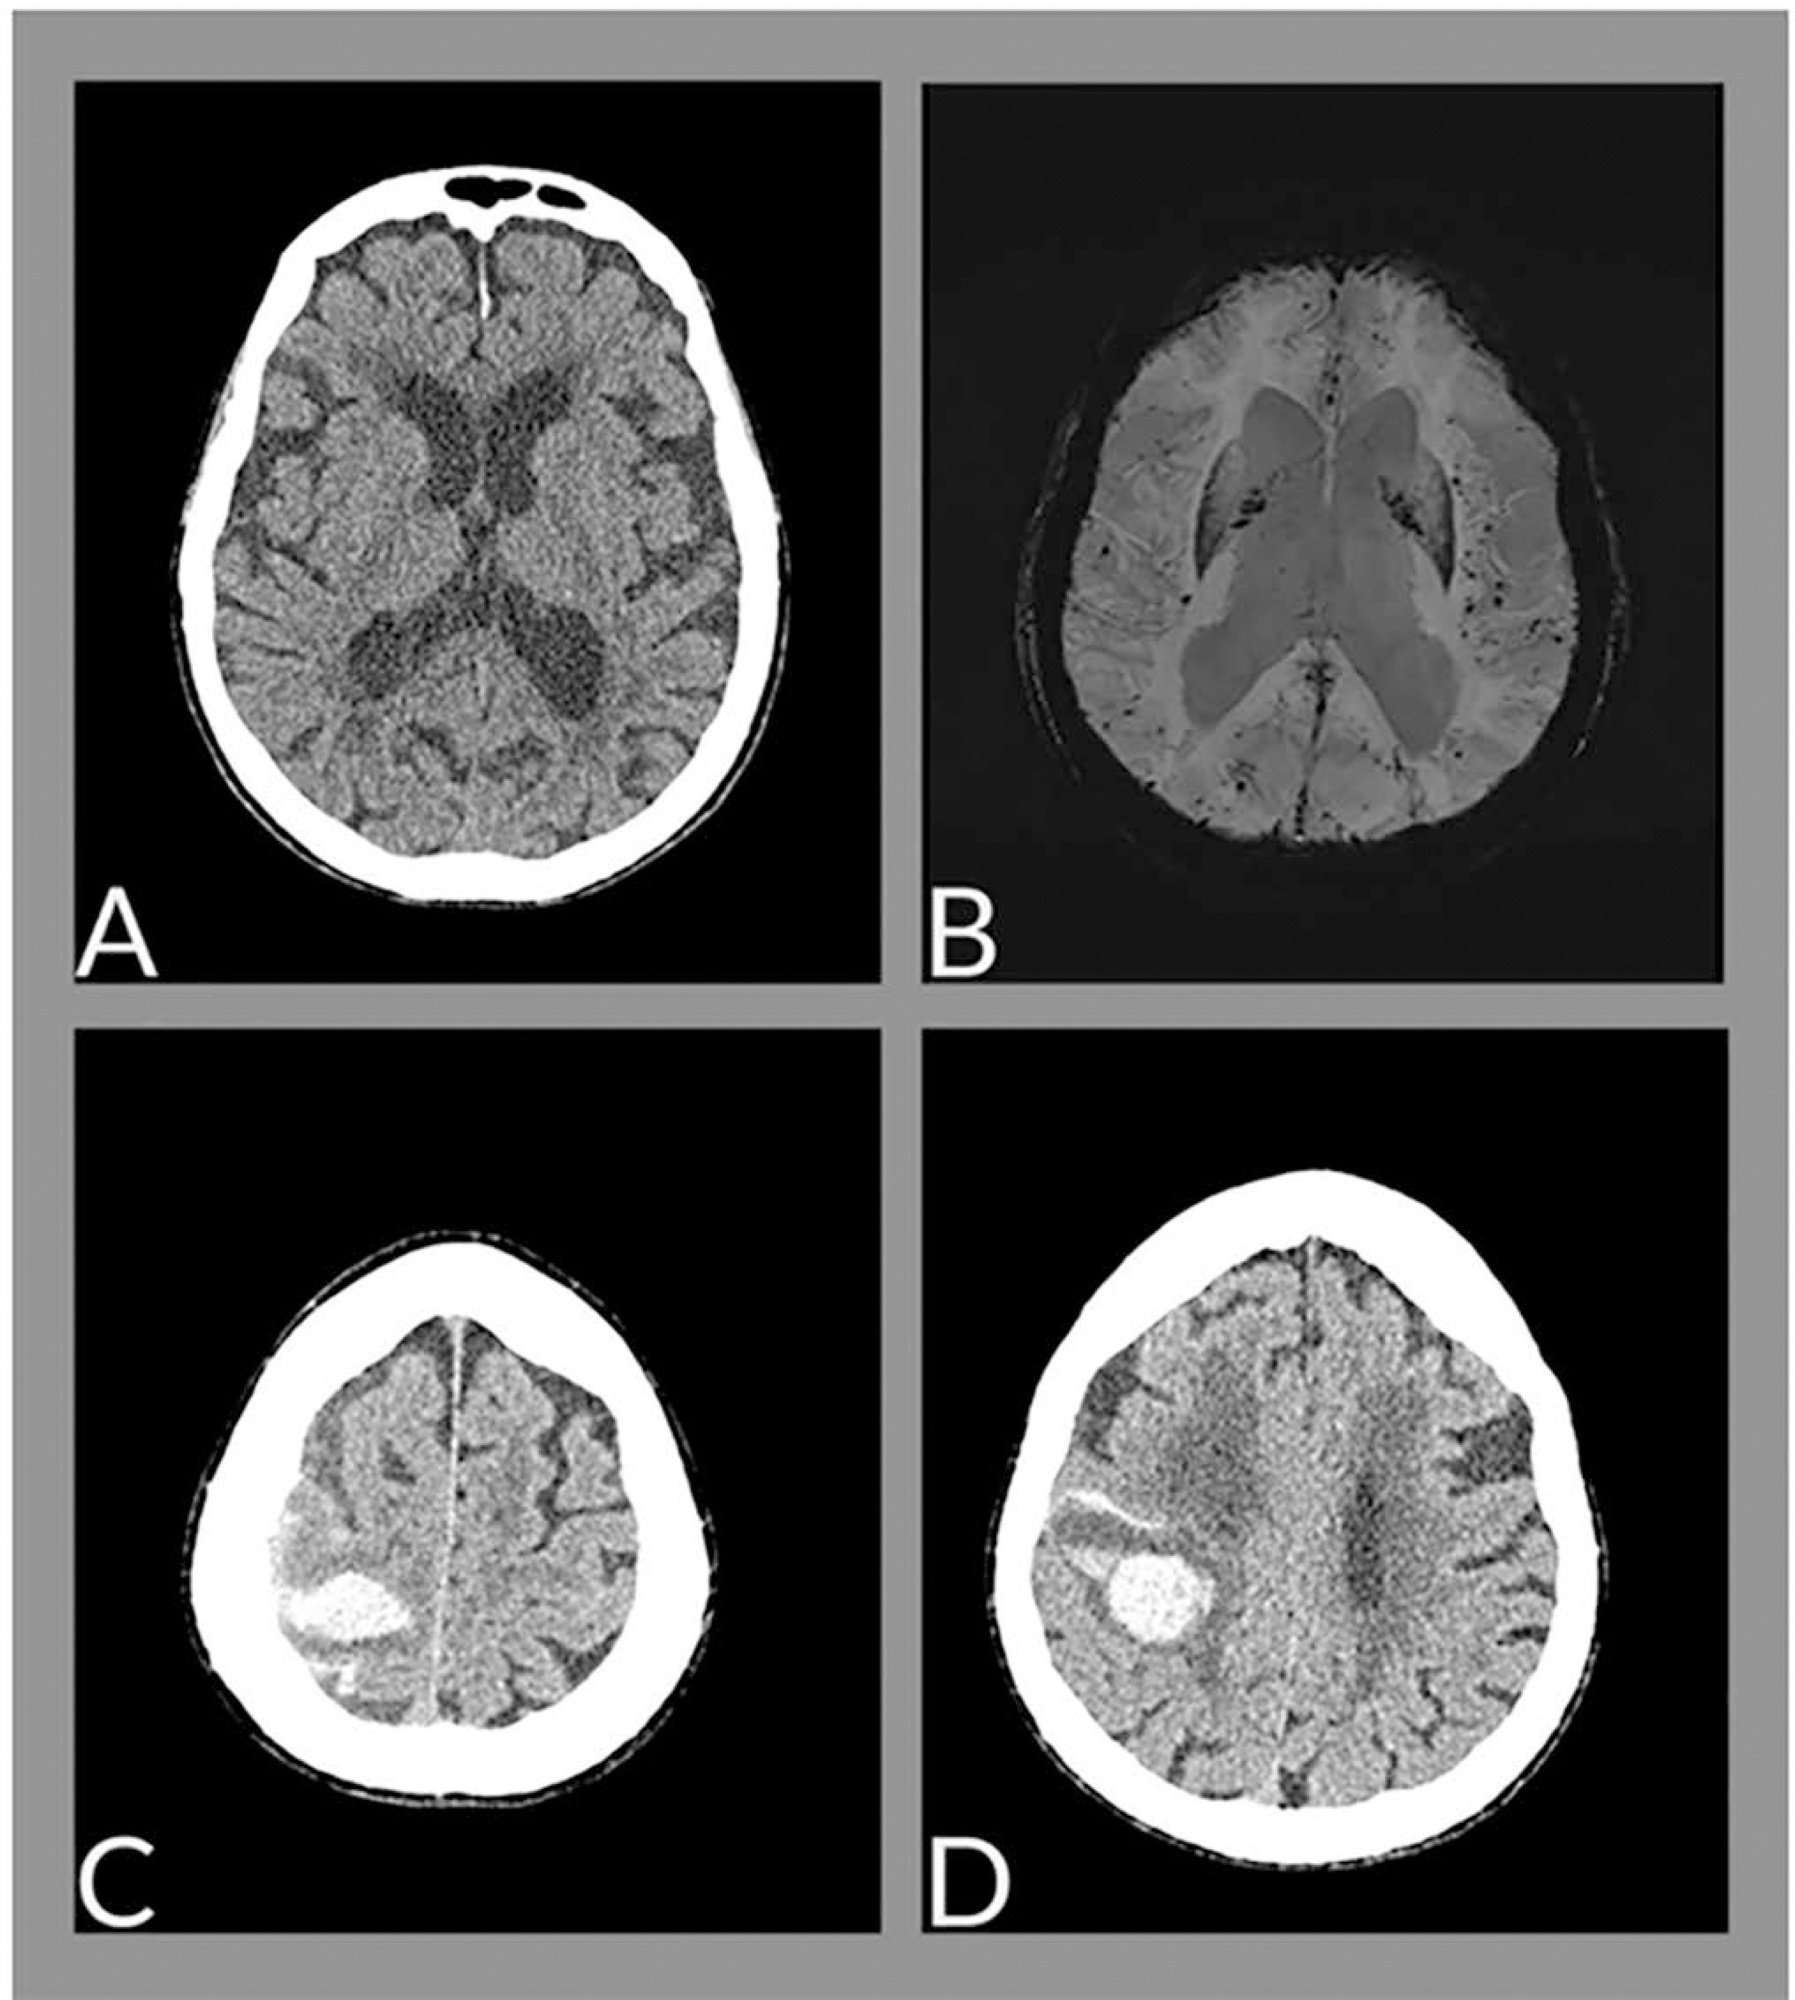 Cerebral hemorrhage during the active phase of SARS-CoV-2 infection in a patient with amyloid angiopathy: case report